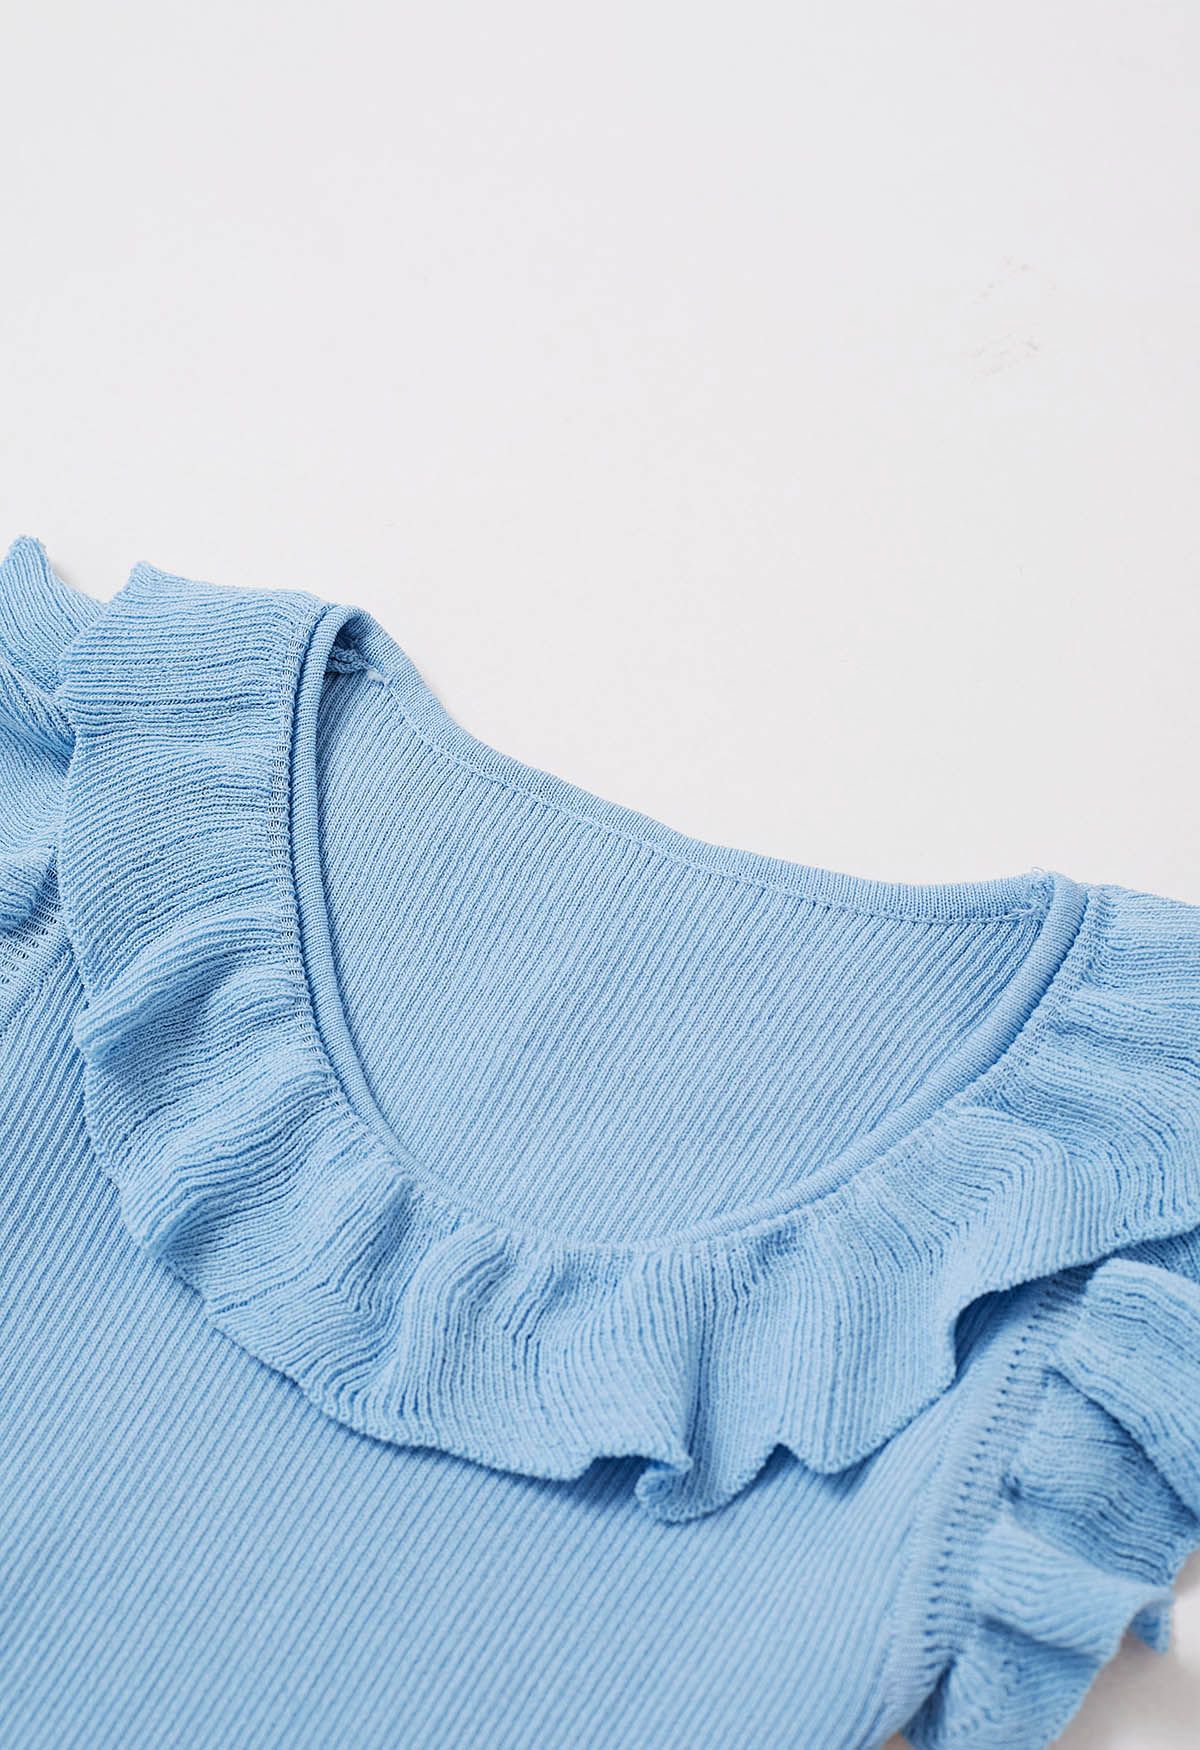 Ethereal Ruffle Sleeveless Knit Top in Blue